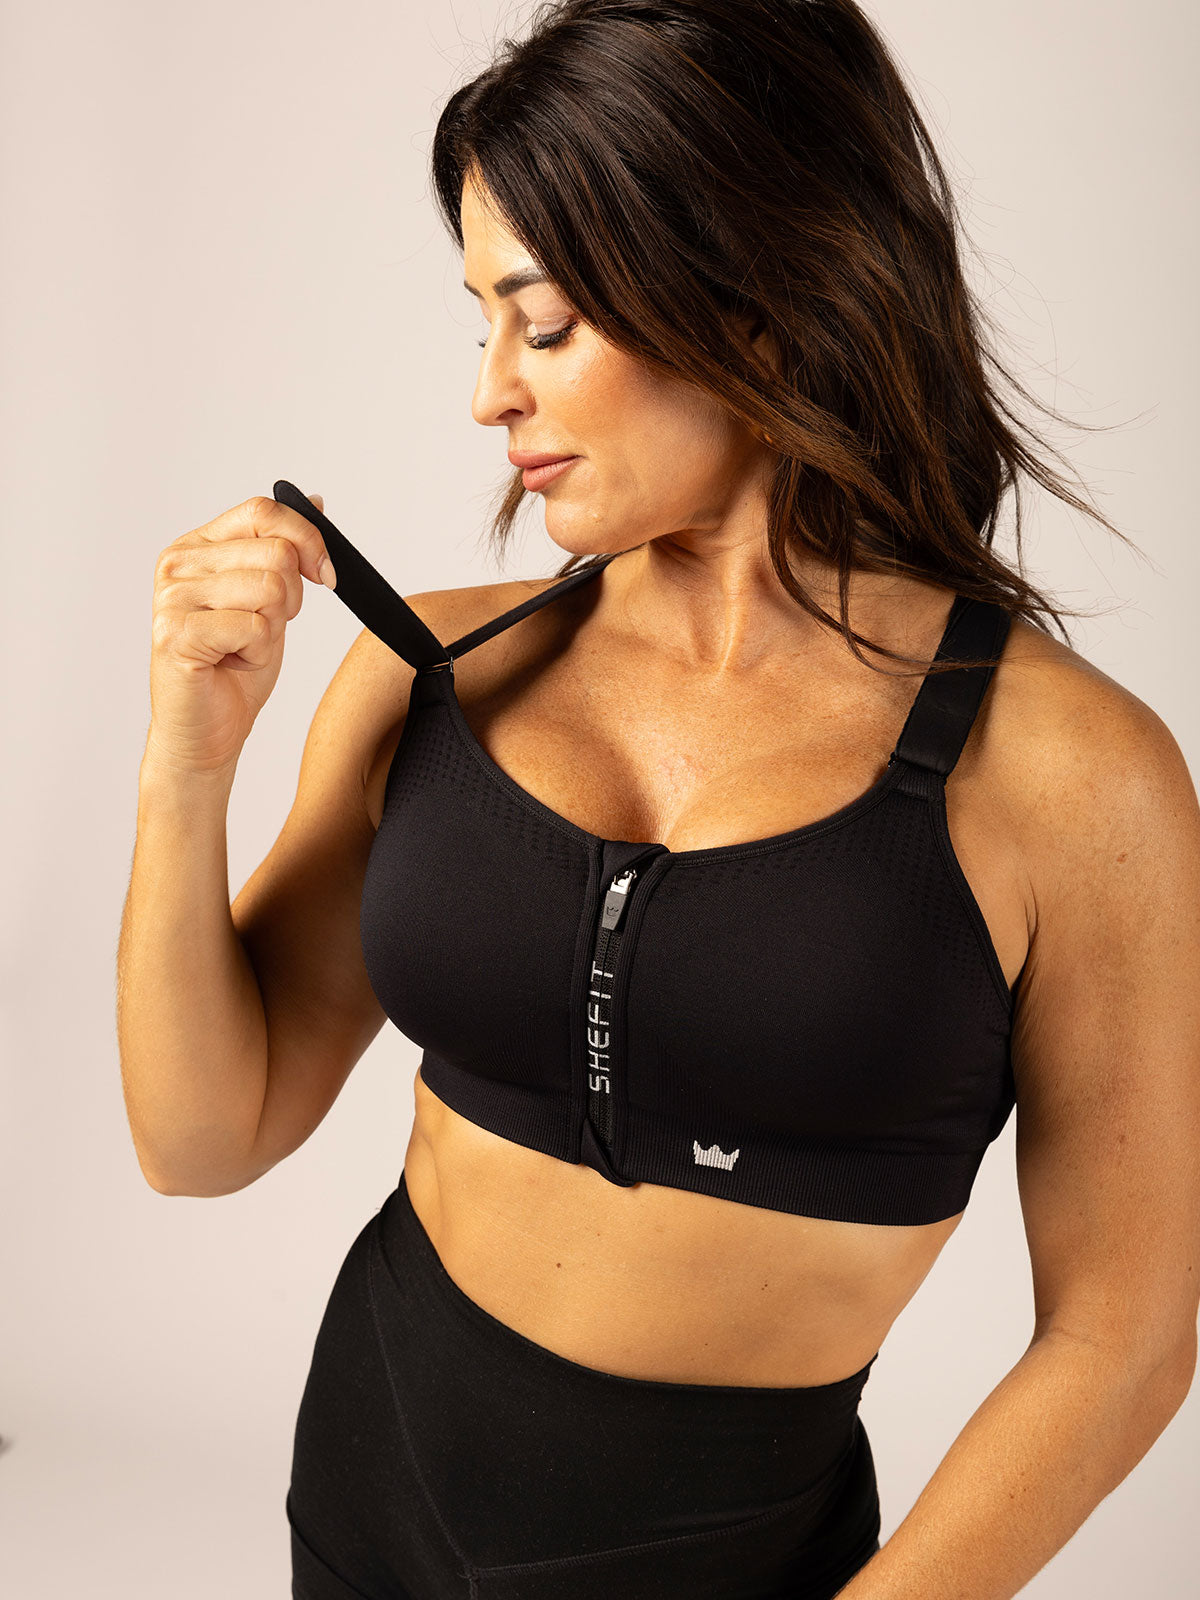 SHEFIT® Low Impact Sports Bra has all the comfort plus support